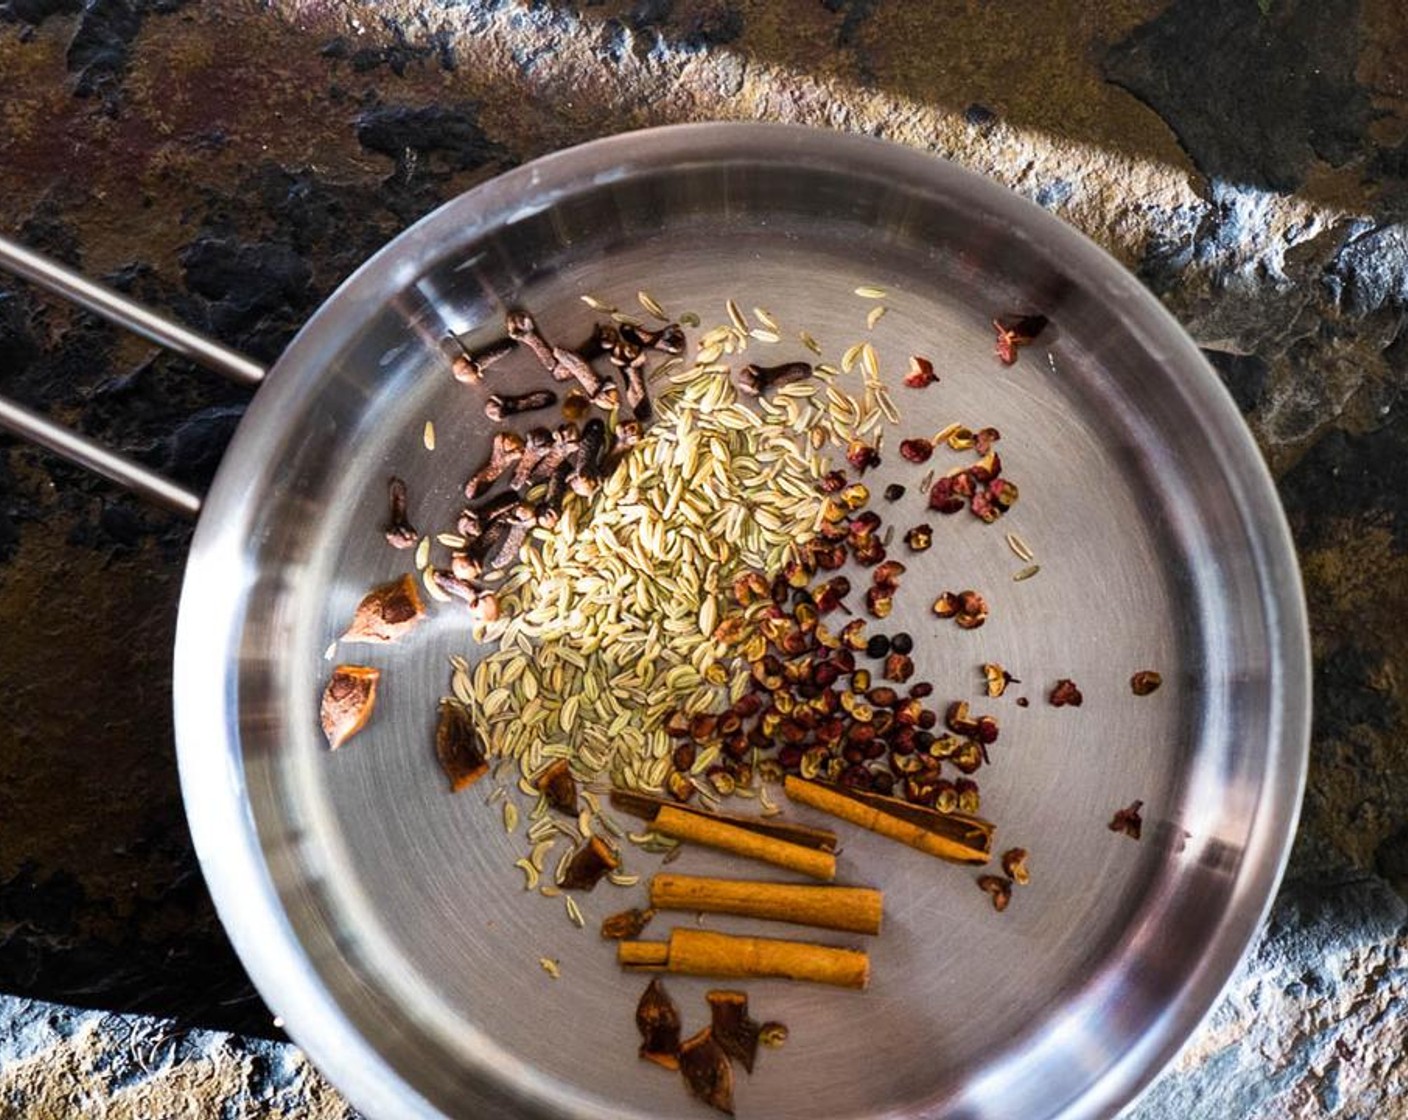 step 1 Add Fennel Seeds (1 tsp), Sichuan Peppercorns (1 tsp), broke apart Cinnamon Stick (1 in), Whole Clove (1 tsp), Star Anise (1) into a small pan. Roast over medium heat until fragrance is released.